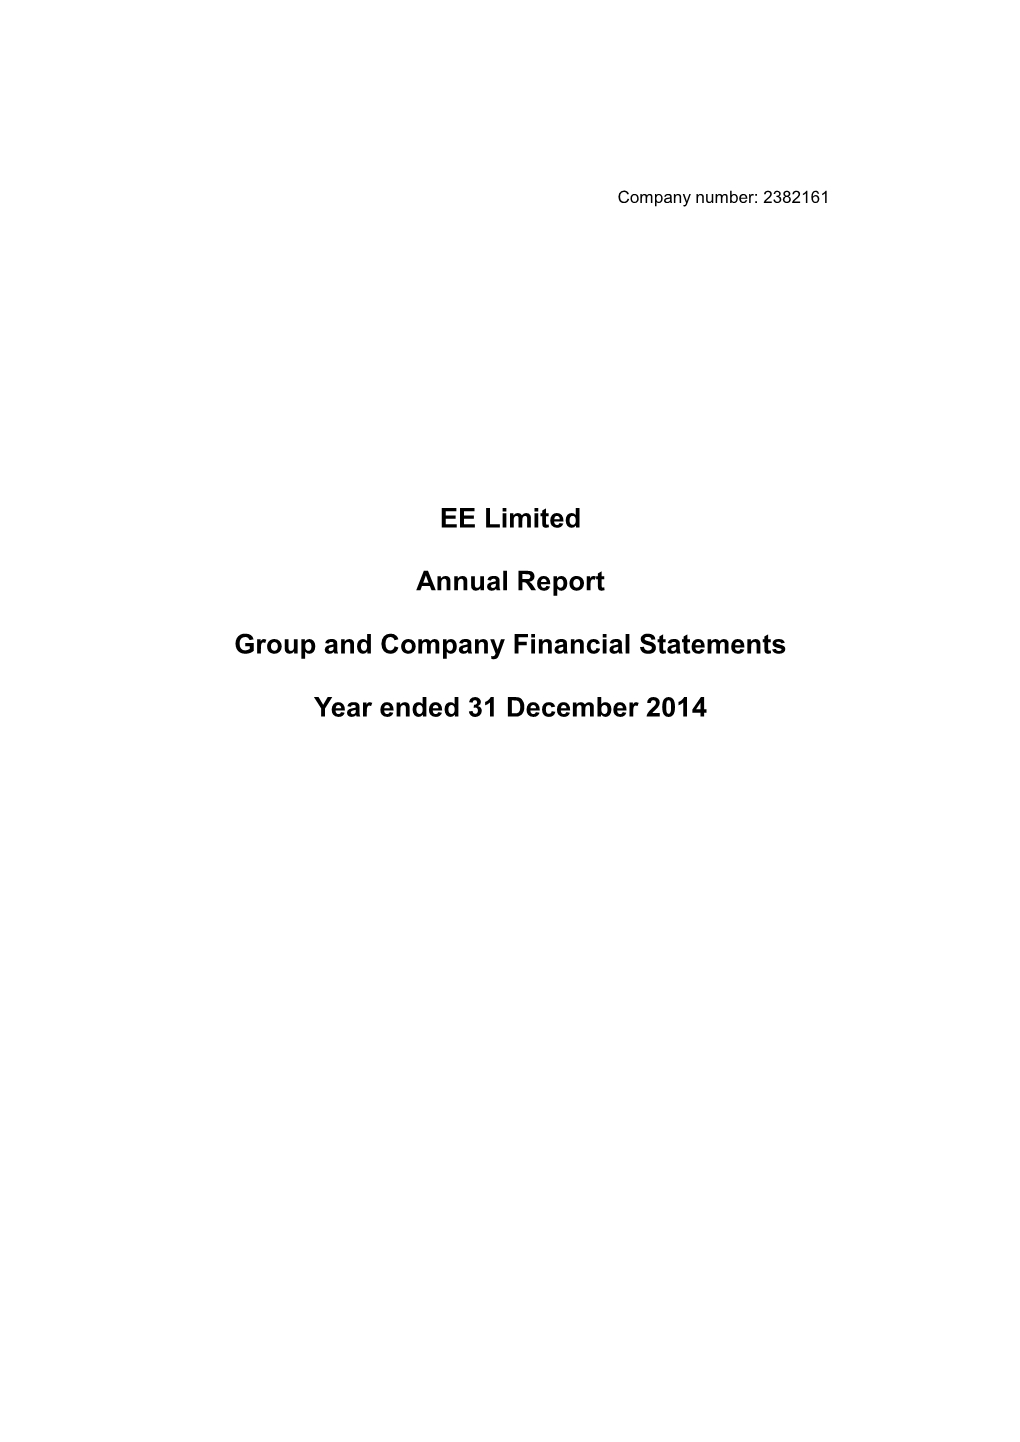 EE Limited Annual Report Group and Company Financial Statements